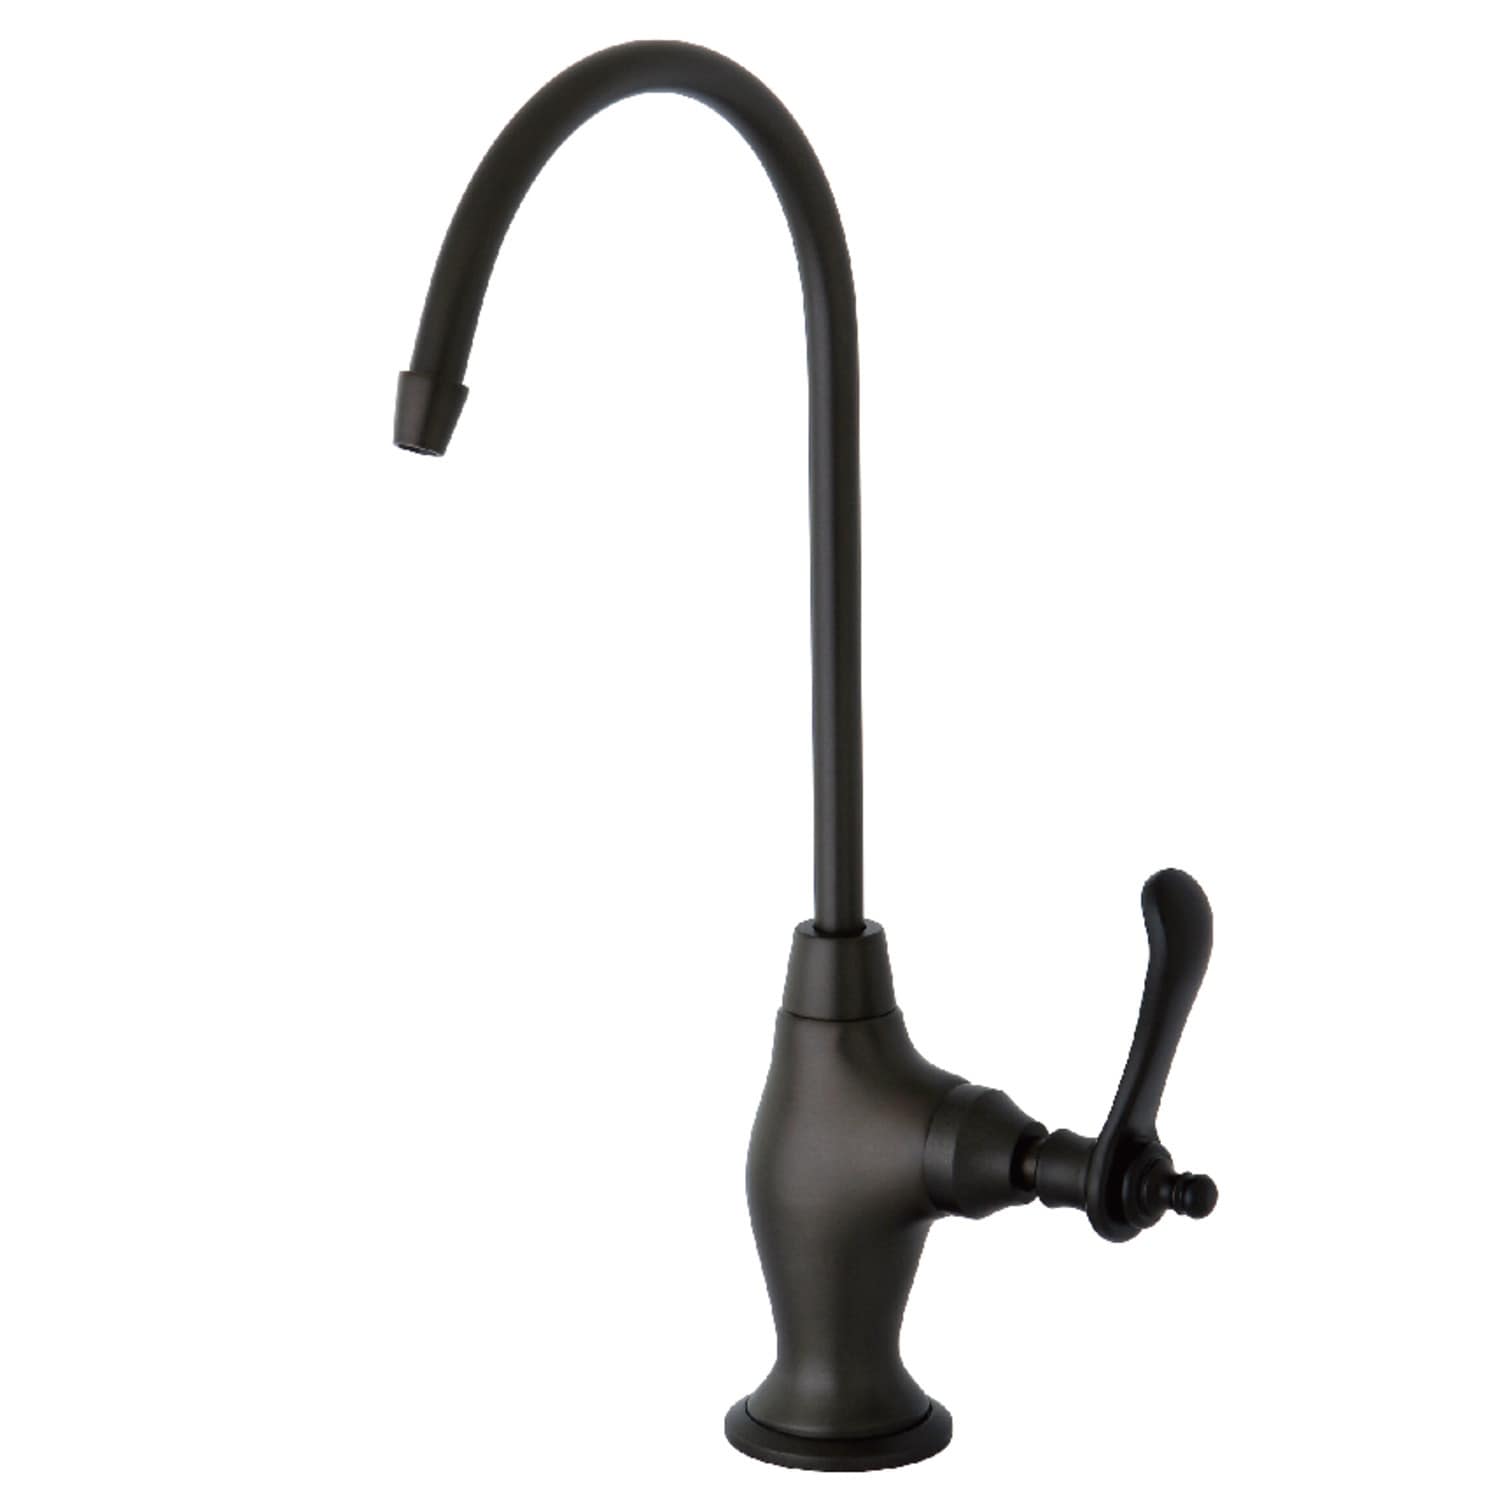 Templeton 1-Handle Water Filtration Faucet